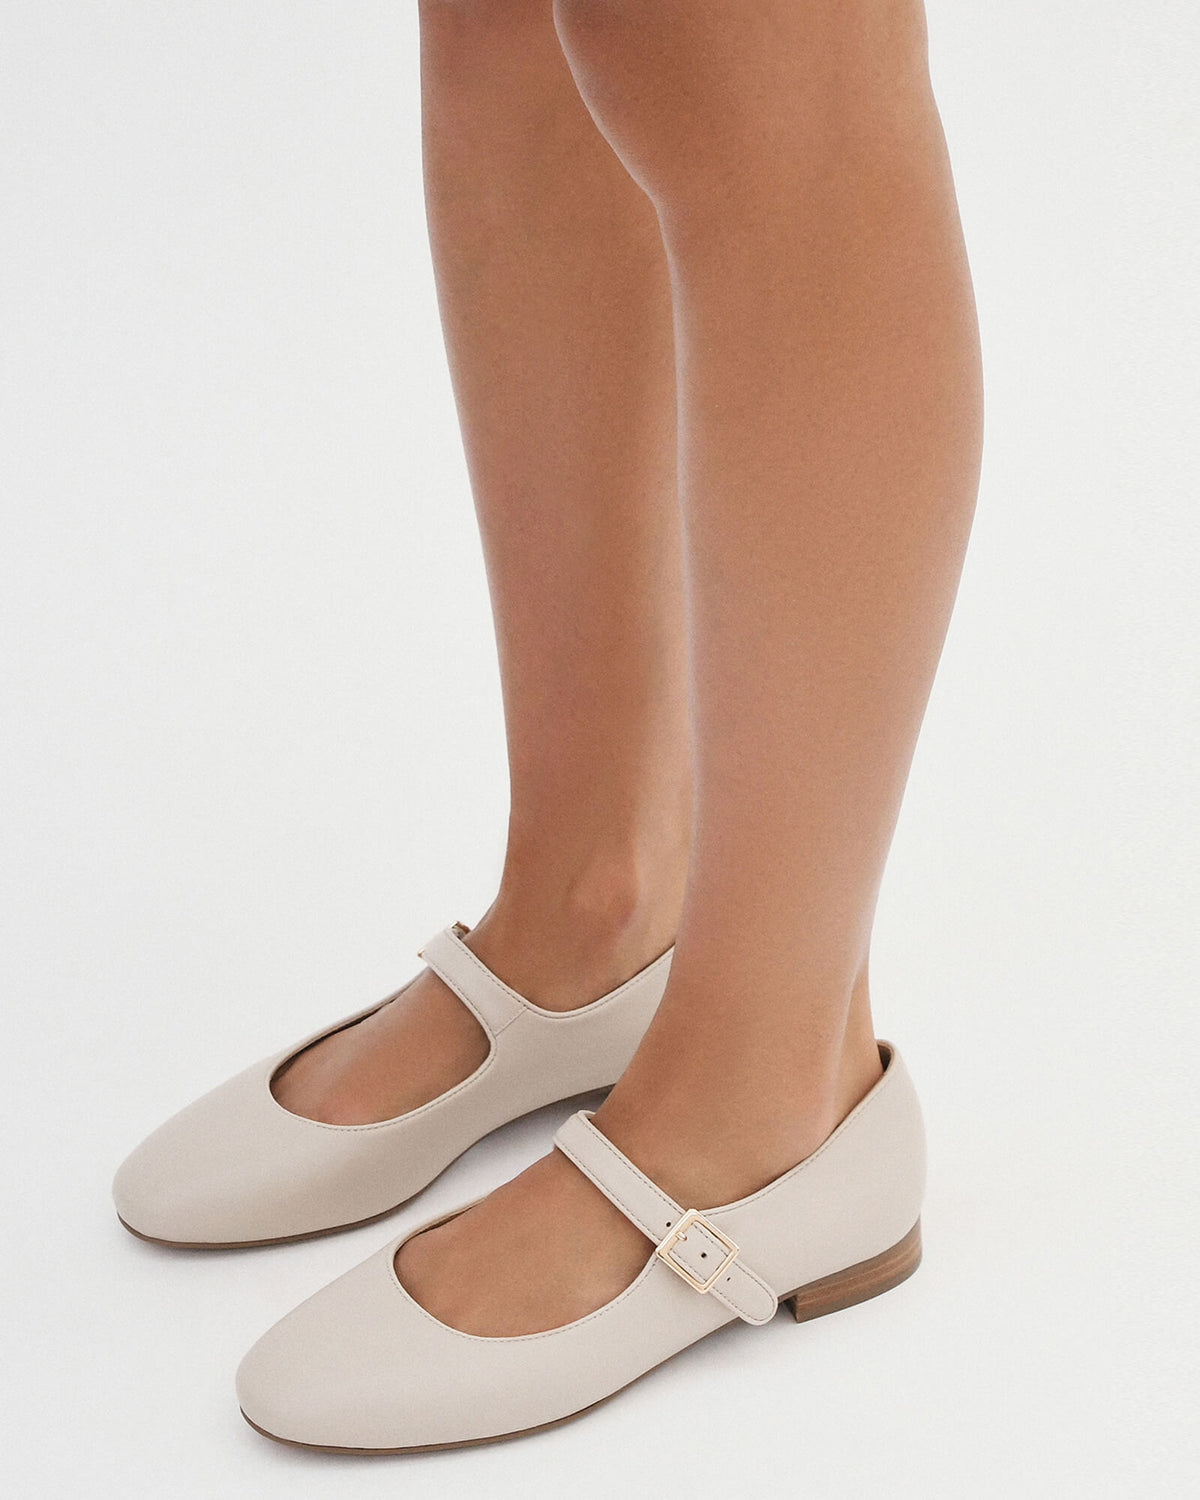 DARCY CASUAL FLATS BONE LEATHER